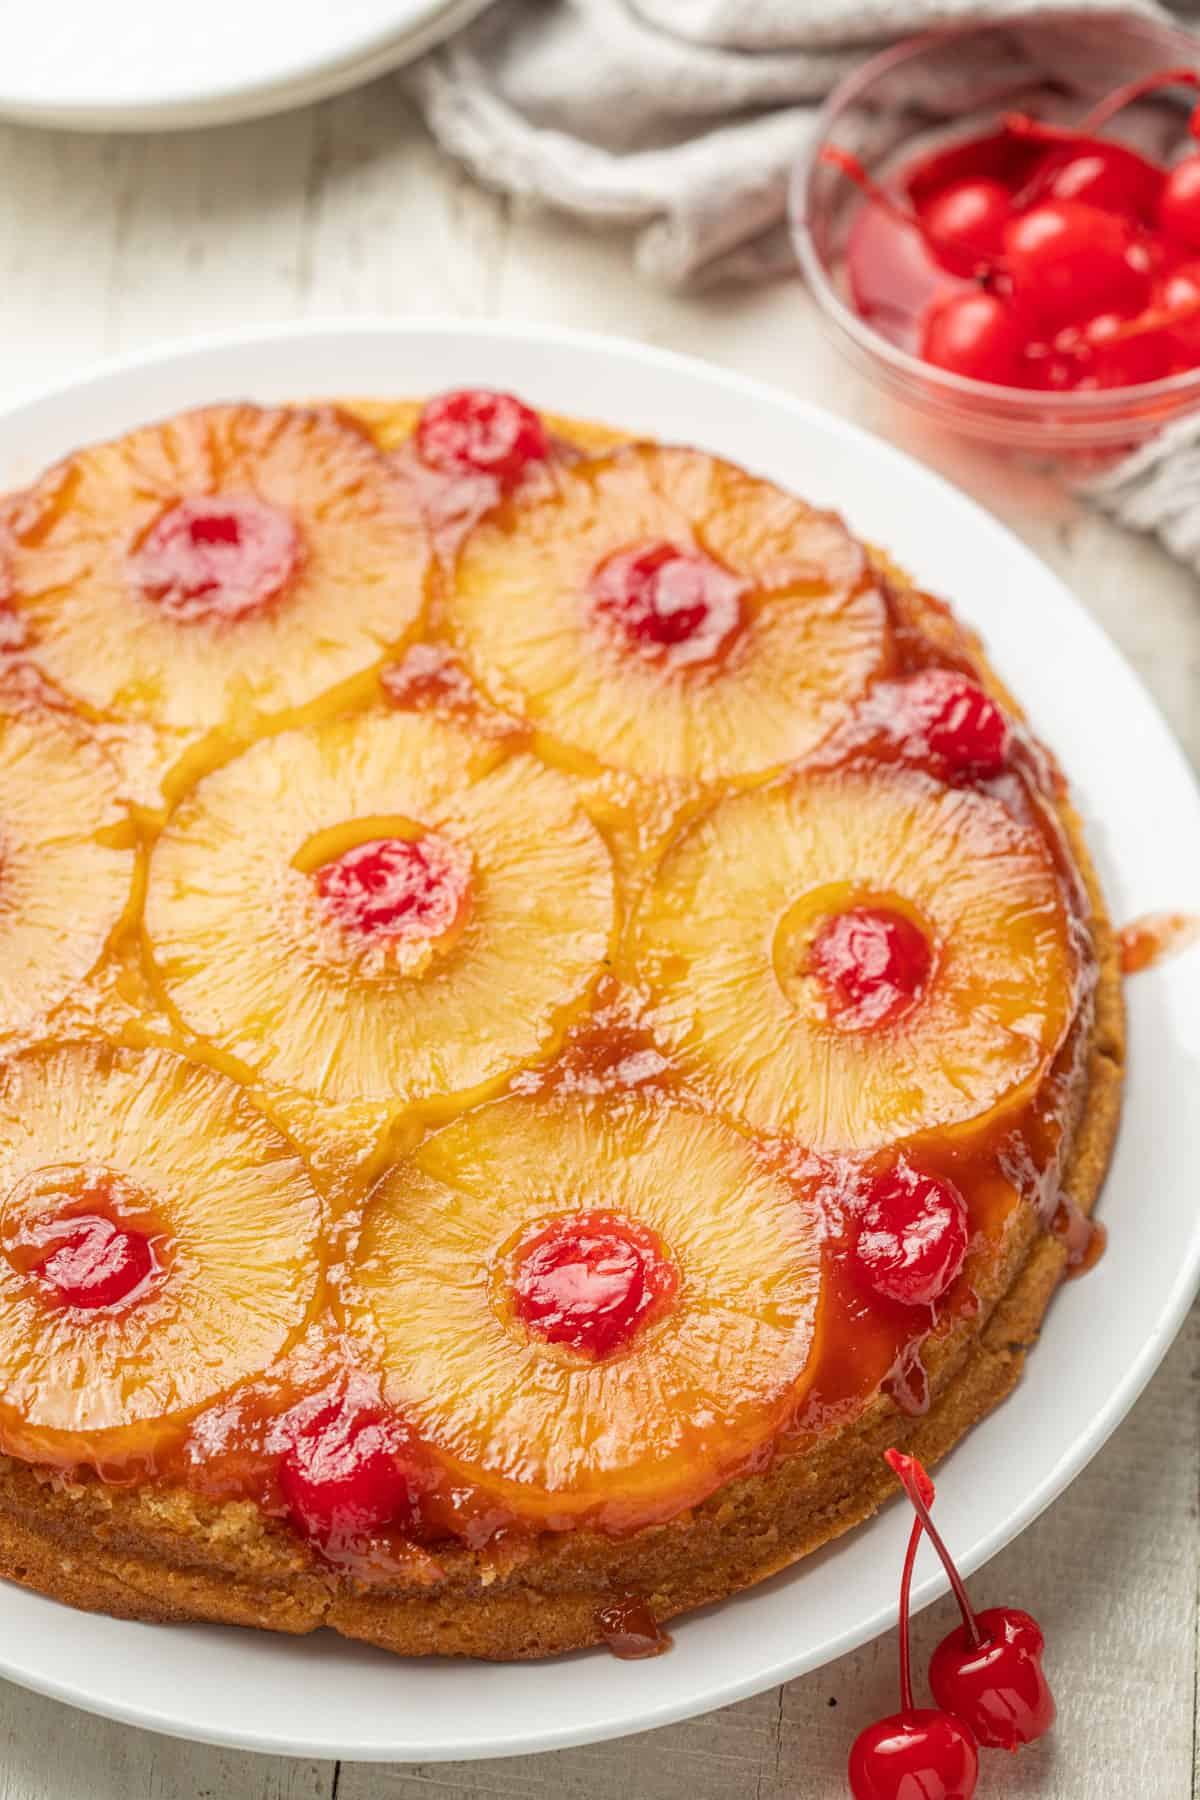 Whole Vegan Pineapple Upside Down Cake on a plate with dish of cherries in the background.